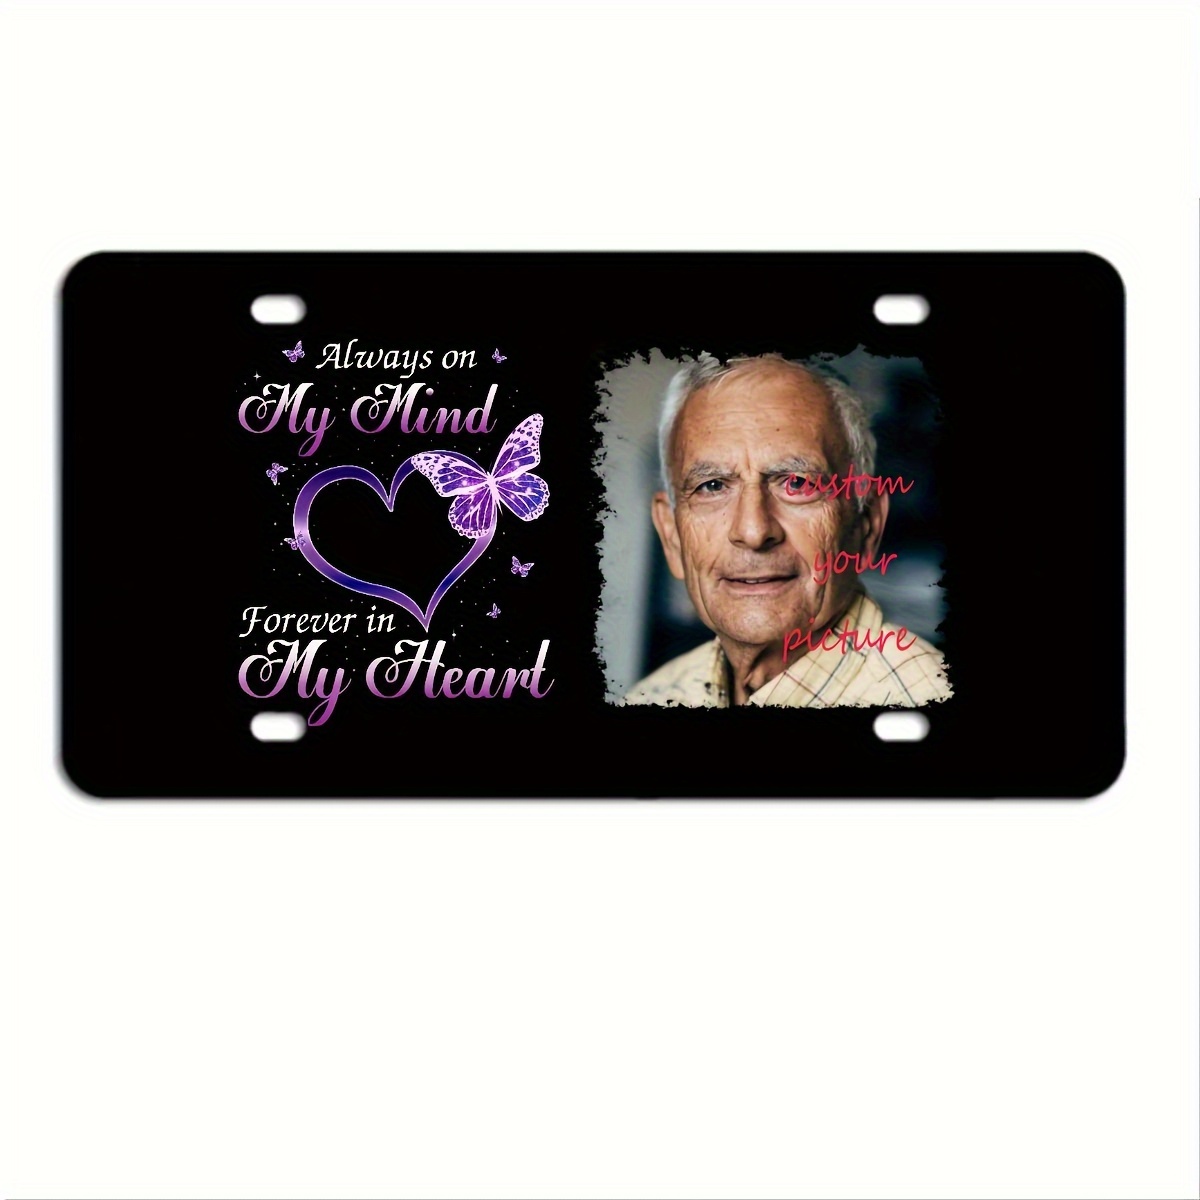 

(customized) Forever In My Heart Butterfly Memorial Personalized Photo License Plates, Decorative Car Front Metal Car Plate License Plate Vanity Tag Noverlty License Plate 6x12 Inch